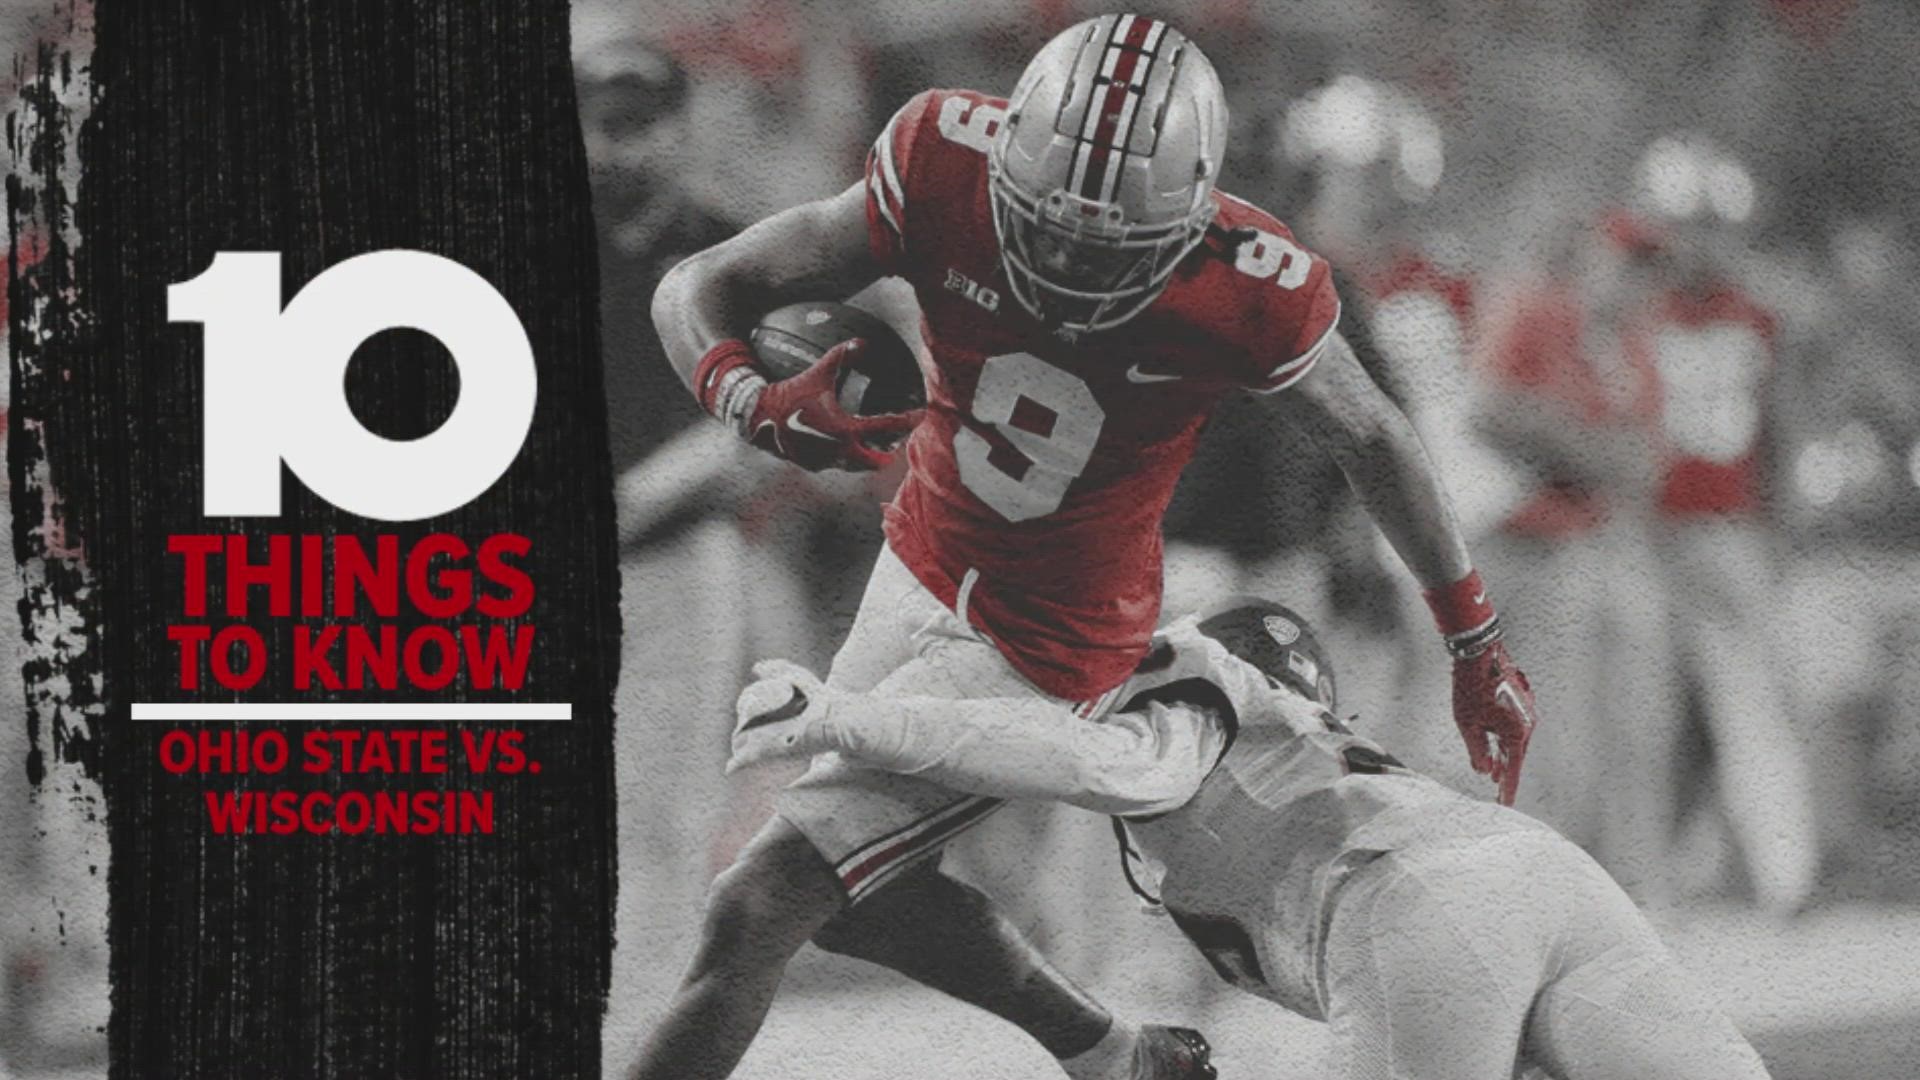 The Buckeyes open Big Ten Conference play against the Badgers Saturday night.